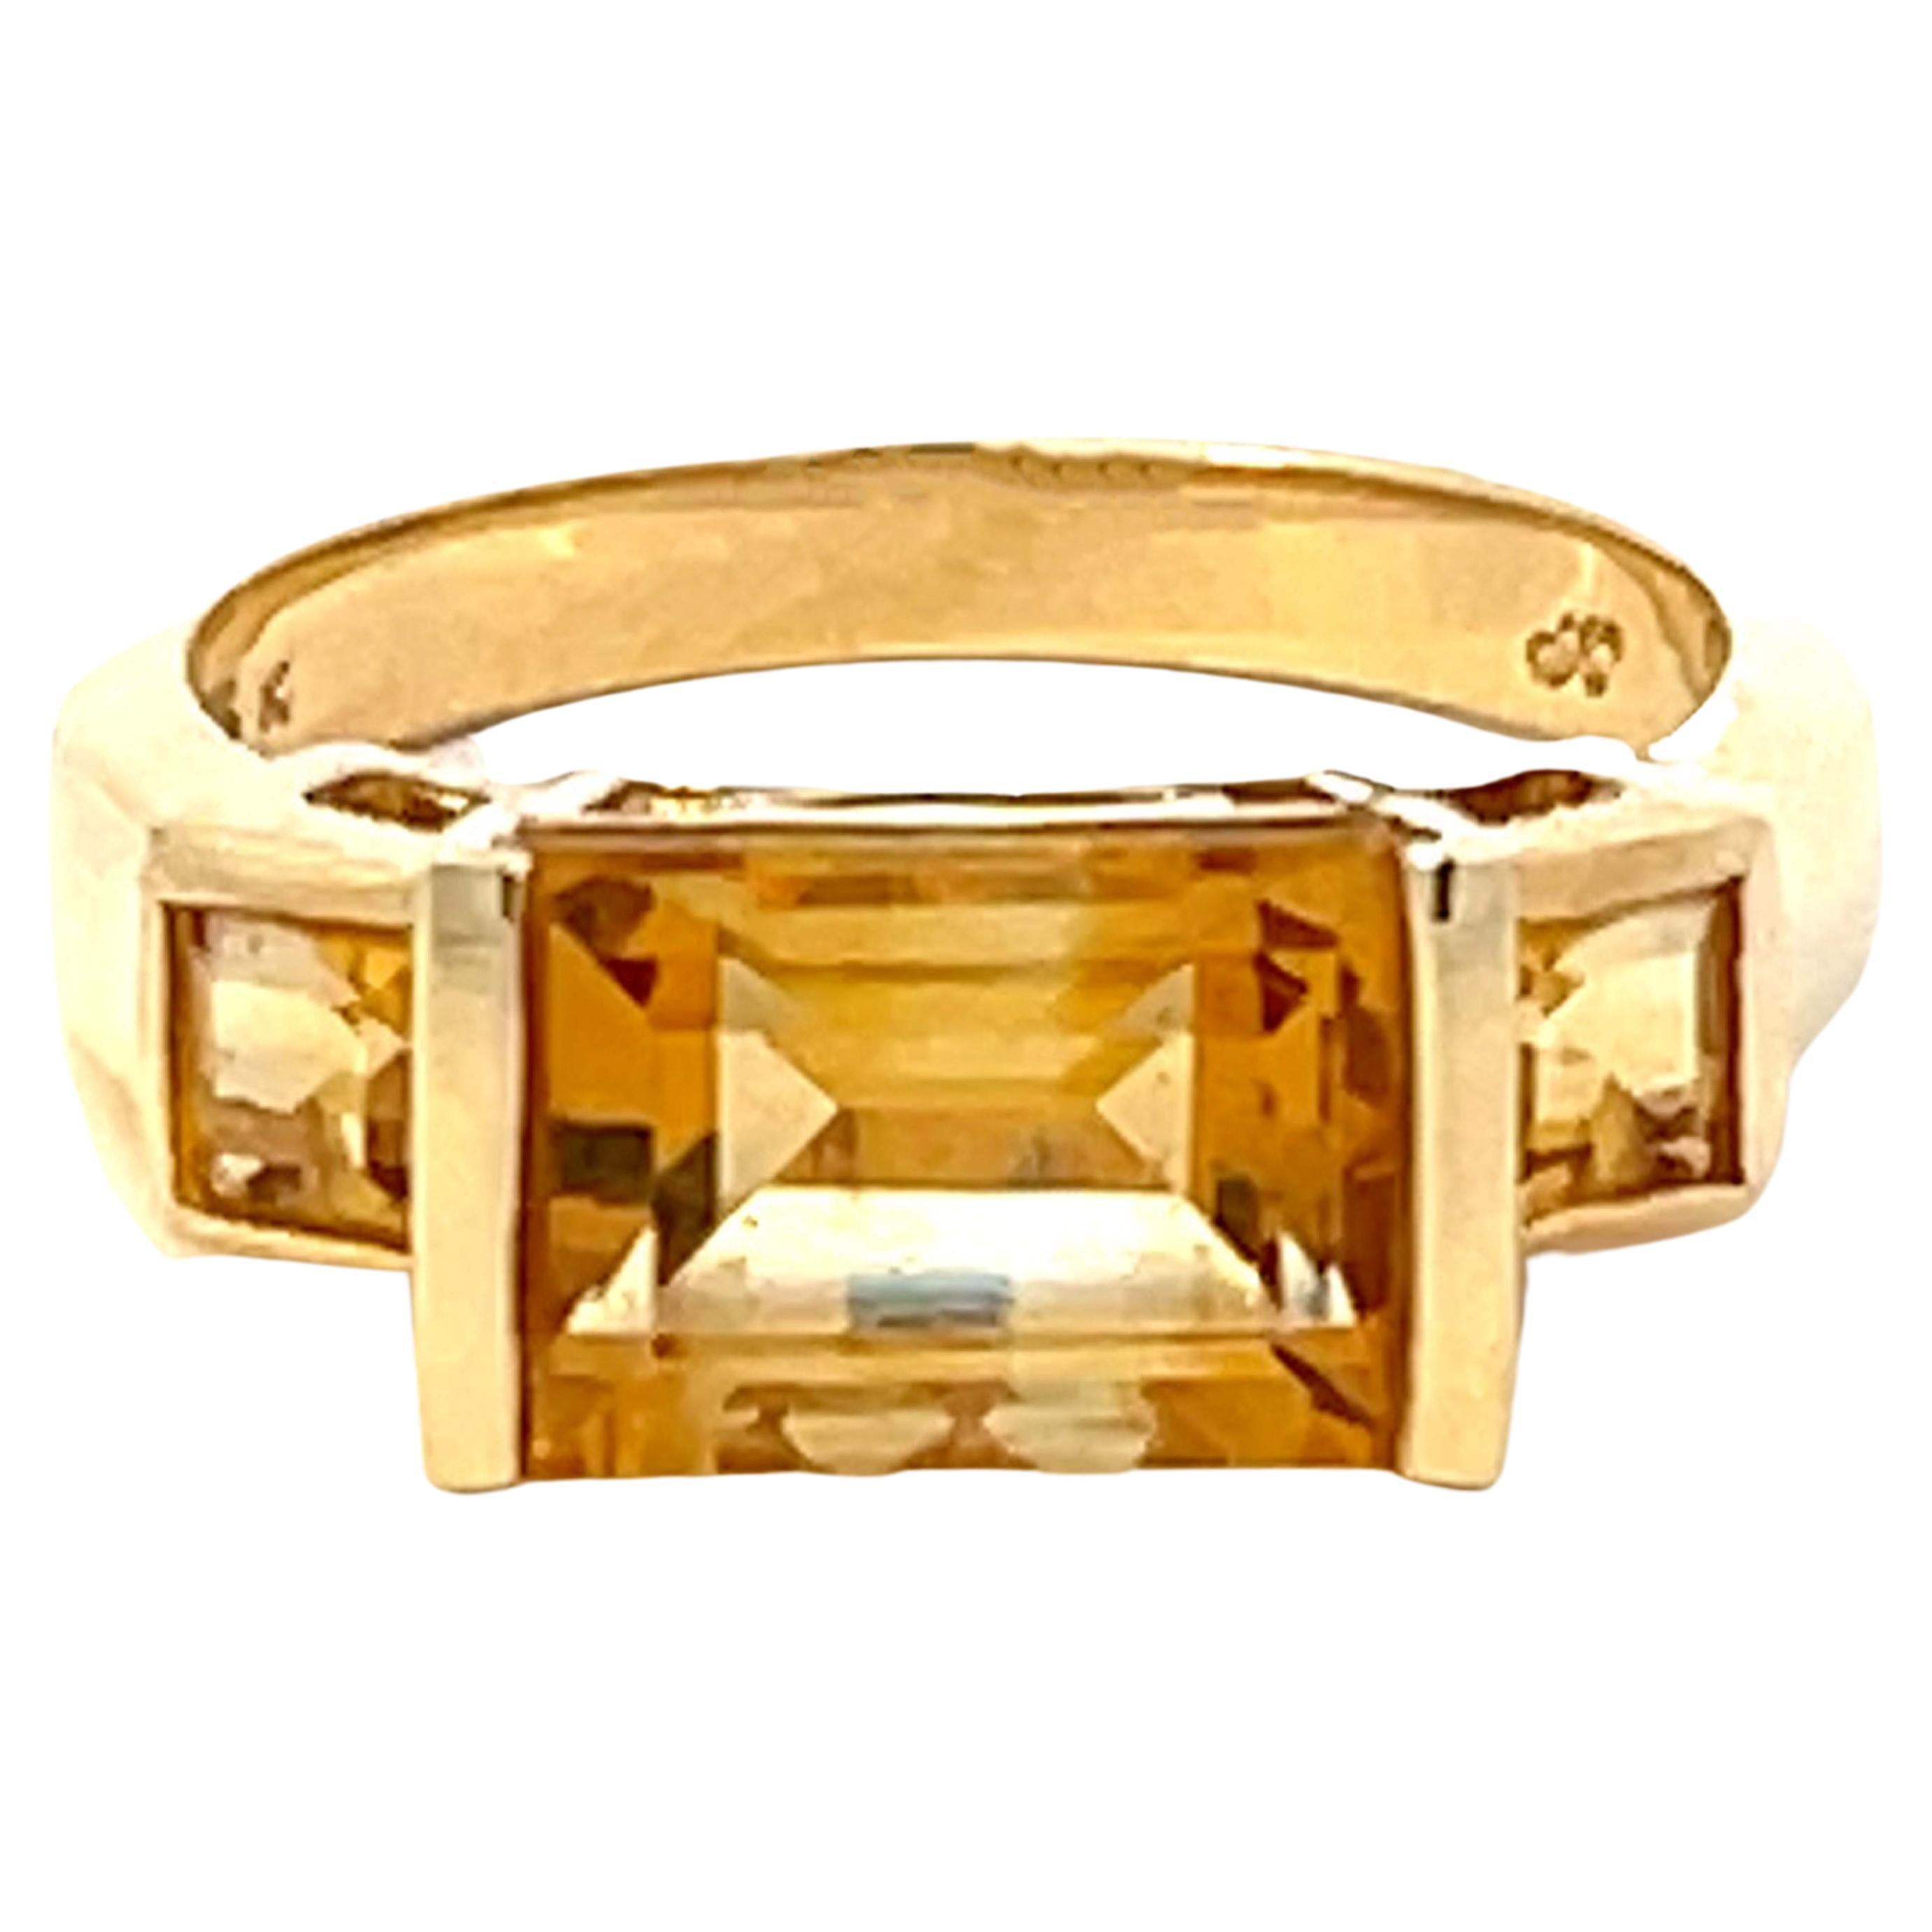 Vintage Triple Citrine Ring in 14k Yellow Gold